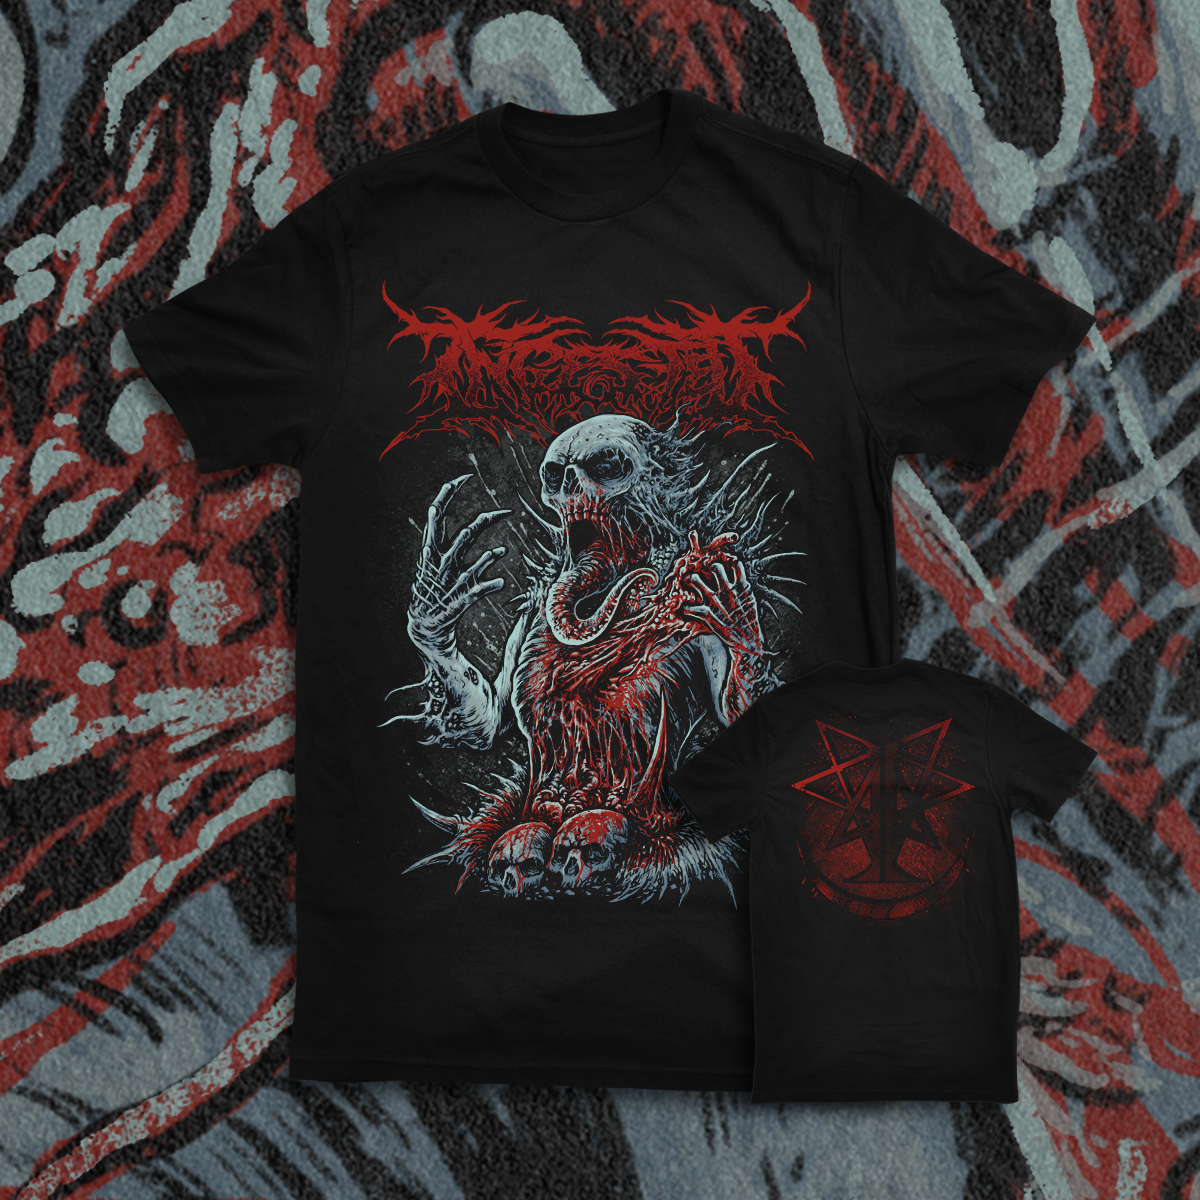 INGESTED "PULLED TO PIECES" SHIRT (PRE-ORDER)